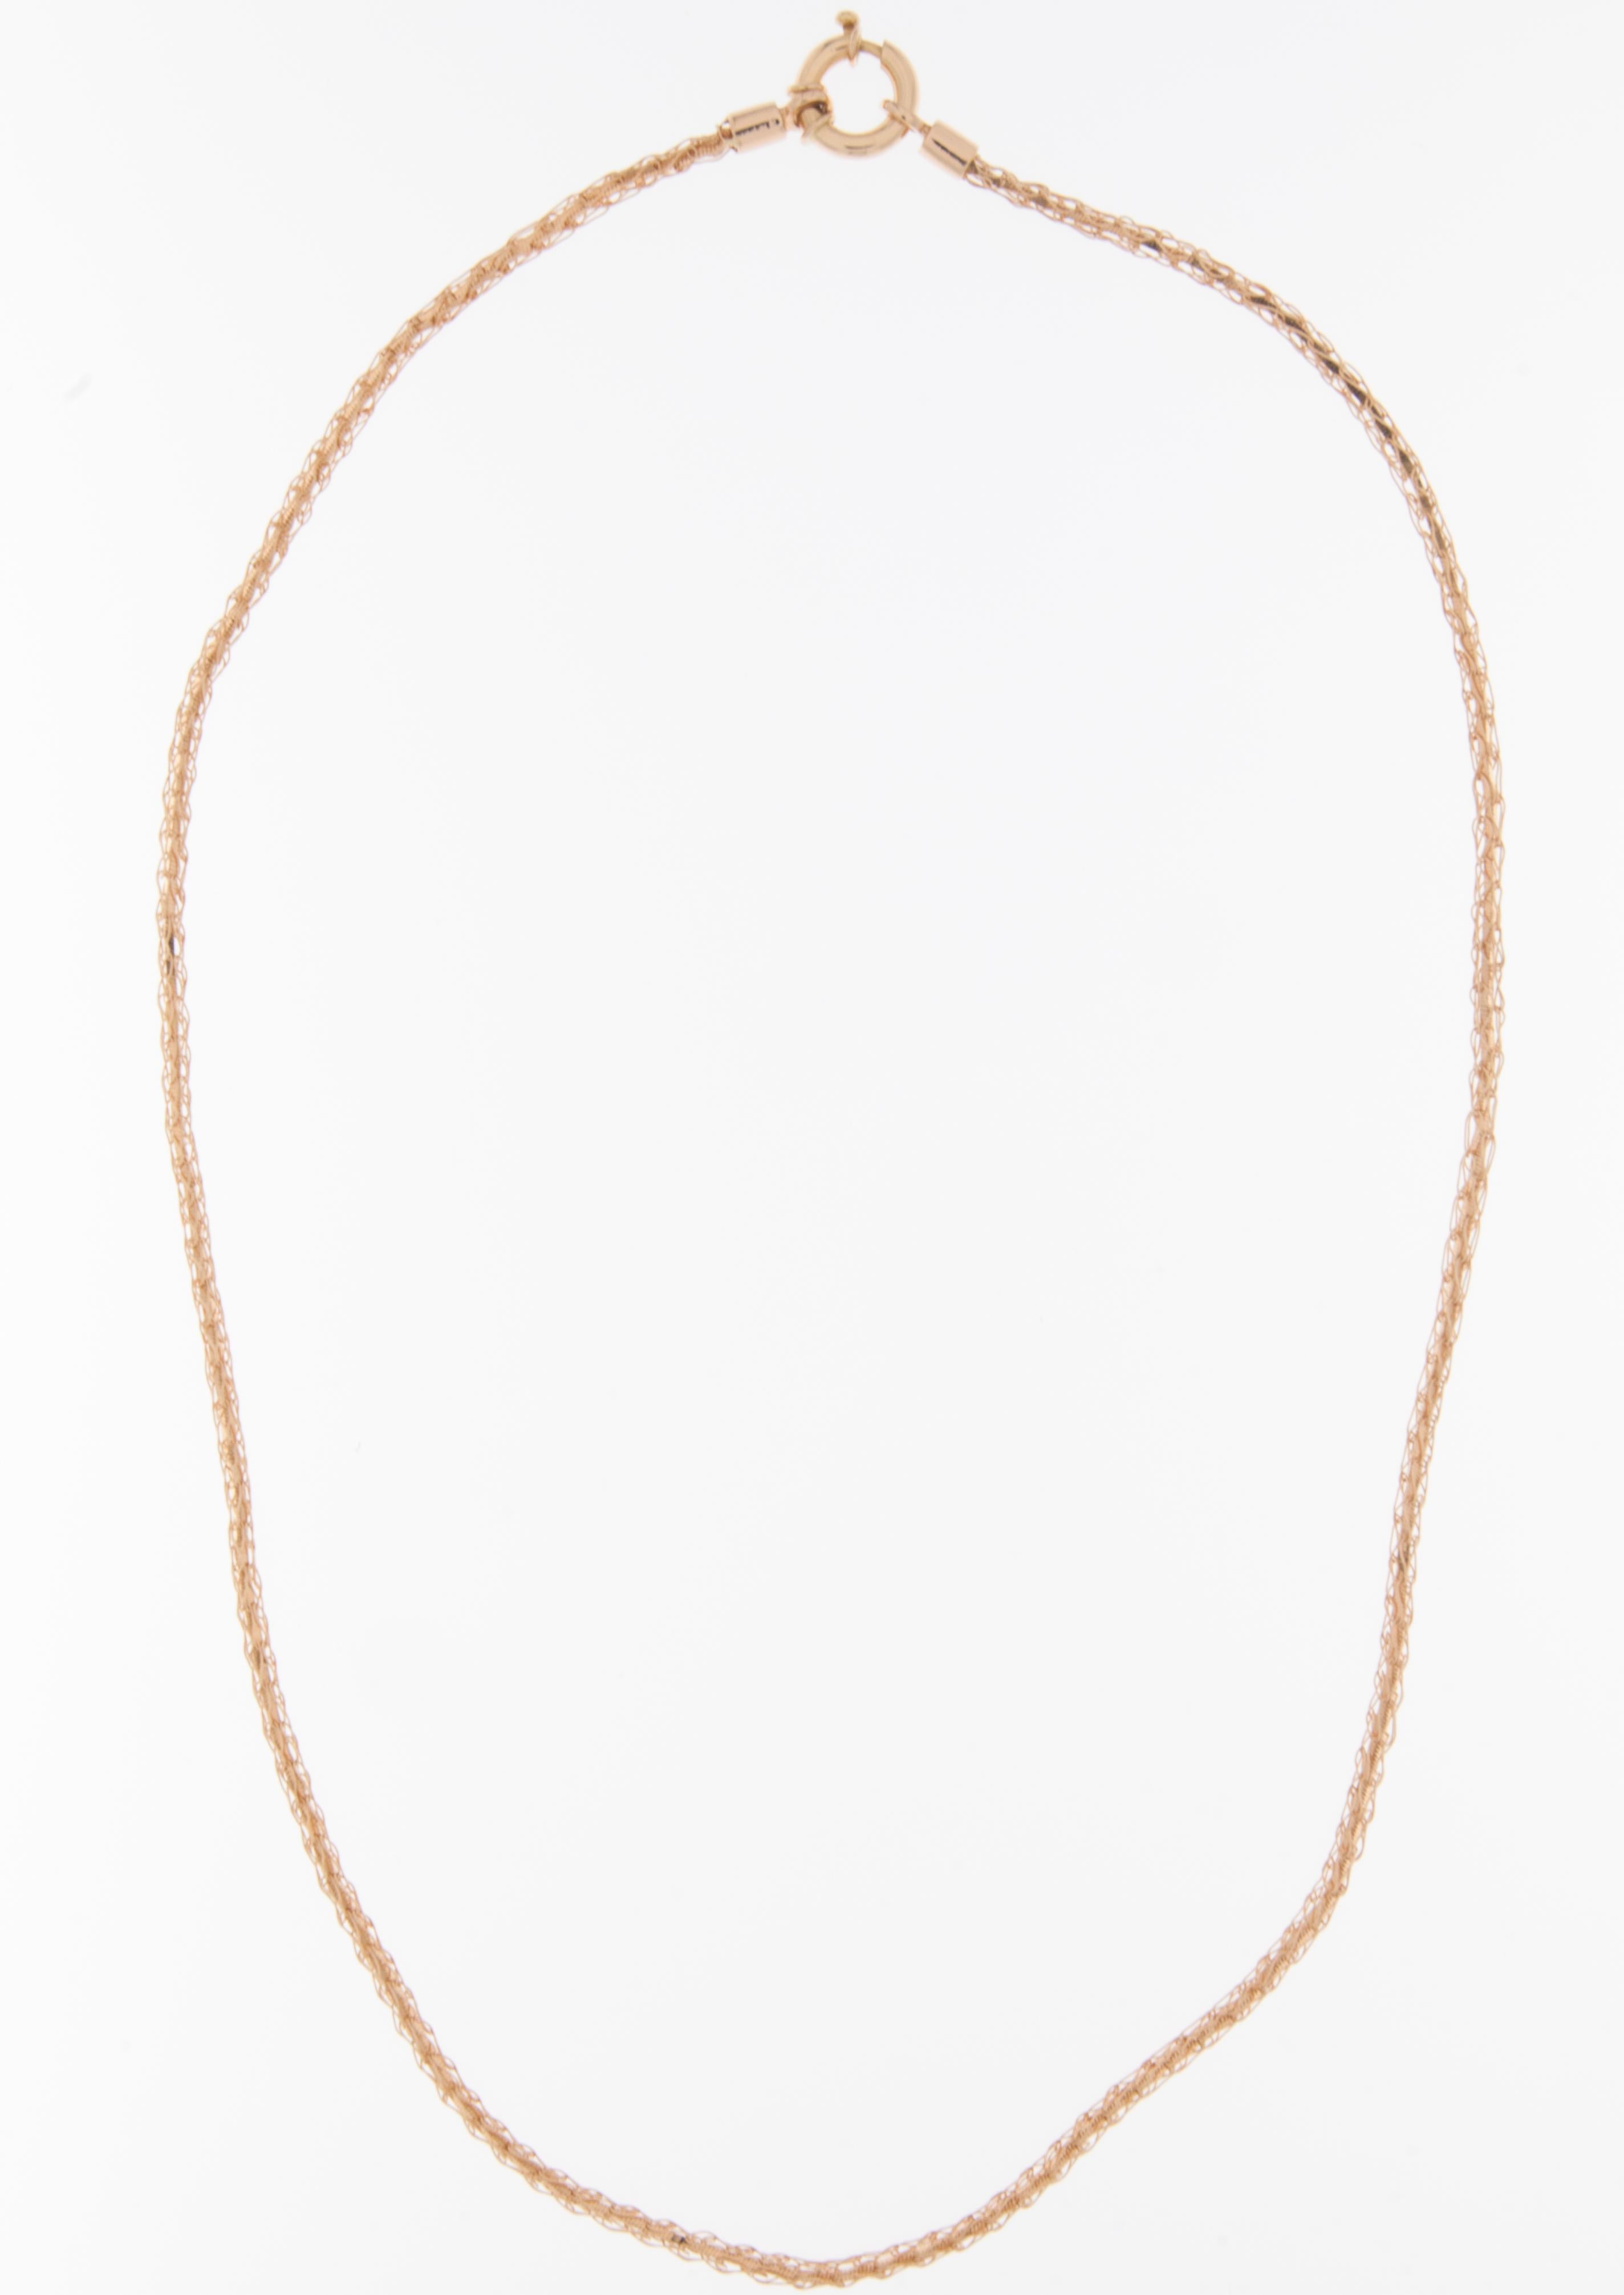 The 19kt Yellow Gold Portuguese Chain Necklace is a stunning and distinctive piece of jewelry that exemplifies elegance and craftsmanship. Crafted from high-quality 19-karat yellow gold, this necklace radiates a warm and lustrous glow, adding a